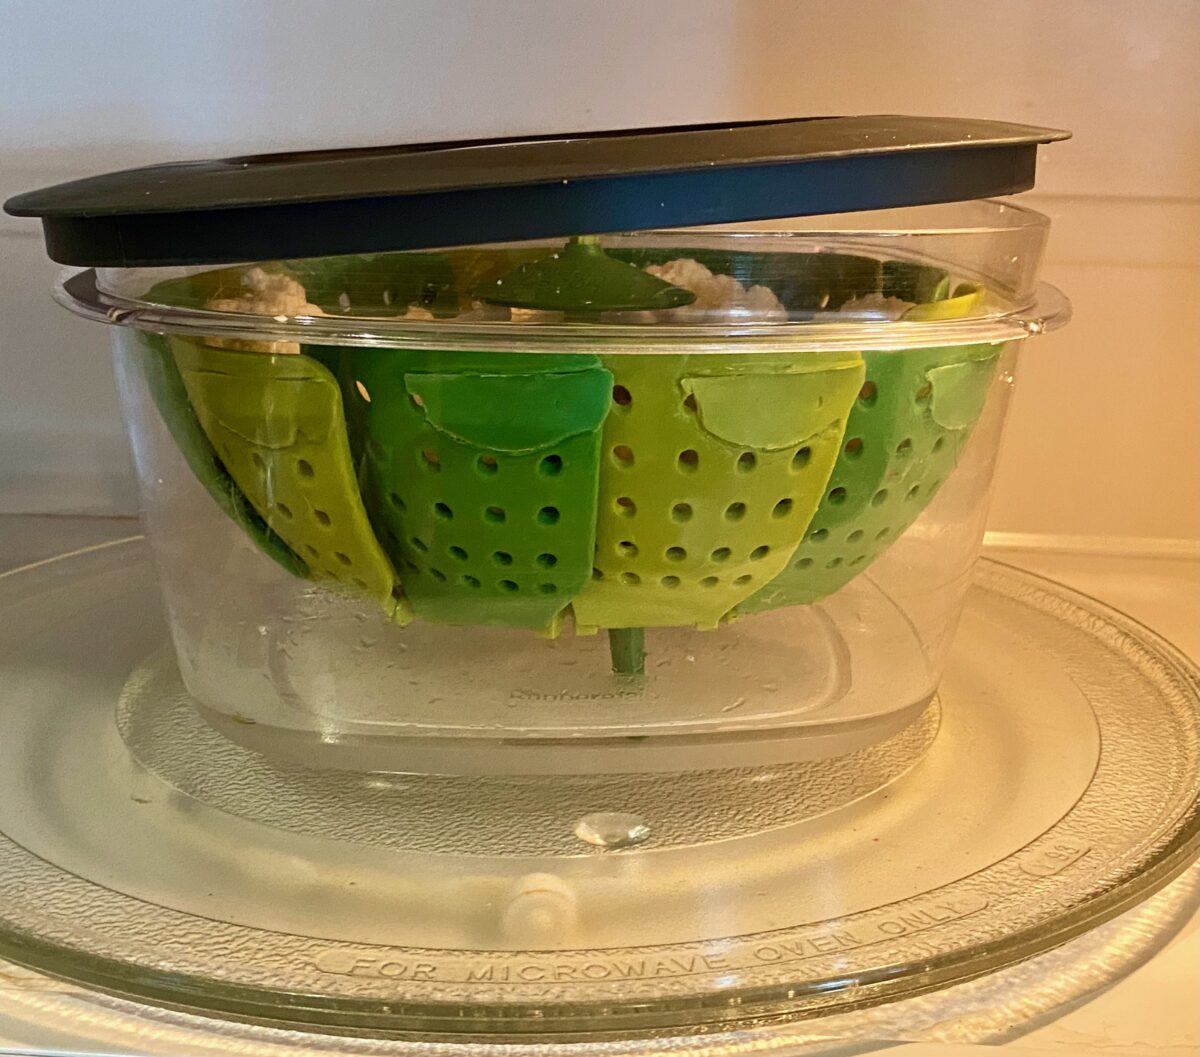 Side view of microwavable steamer inside a microwave.